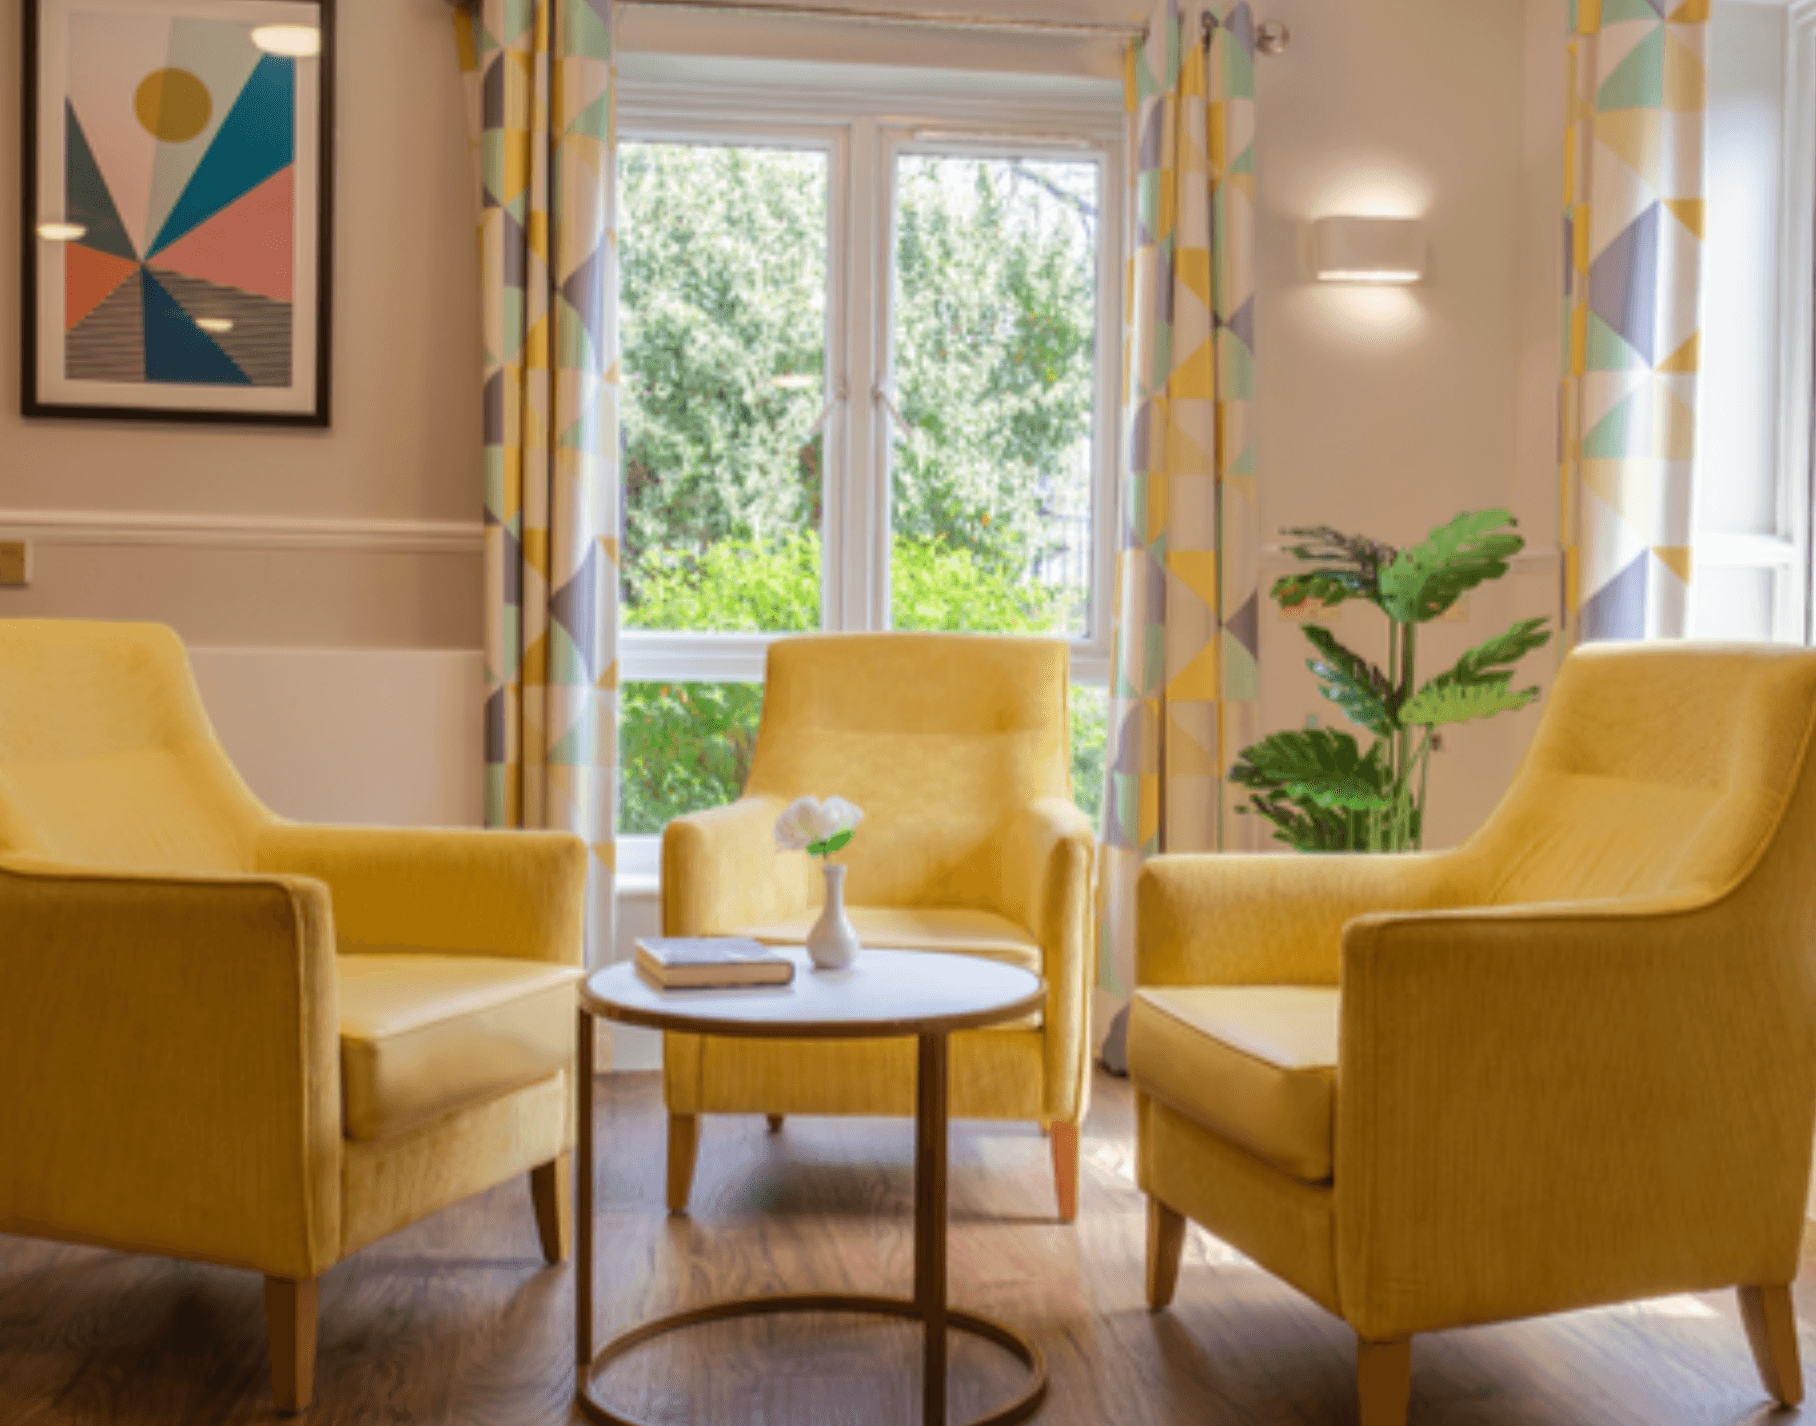 Lounge of Haverlock Court care home in Stockwell, London